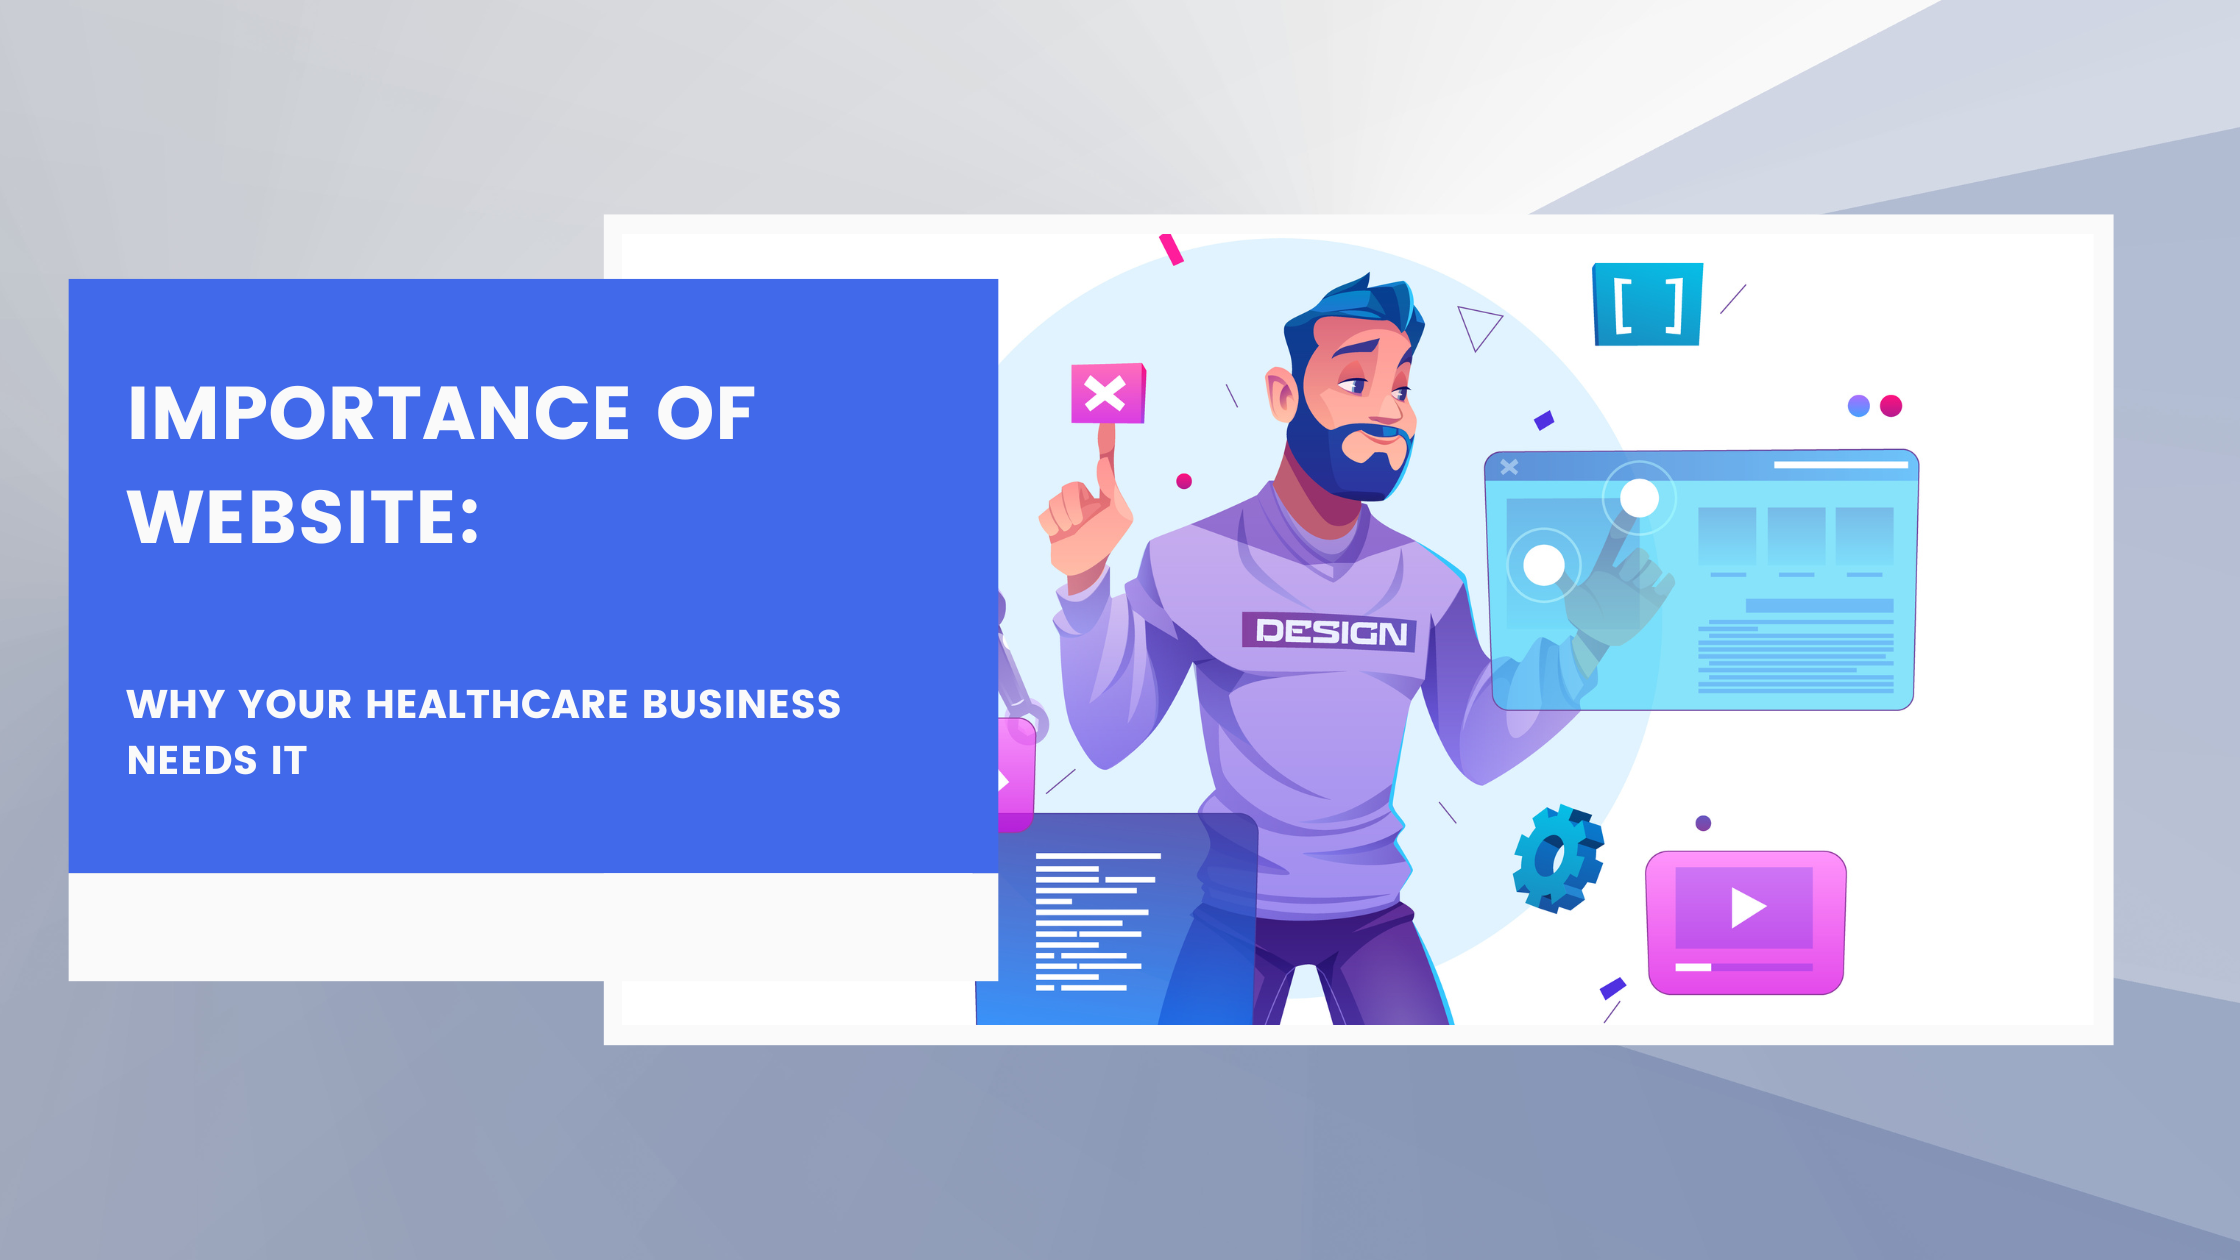 Importance of Website: Why Your Healthcare Business Needs It